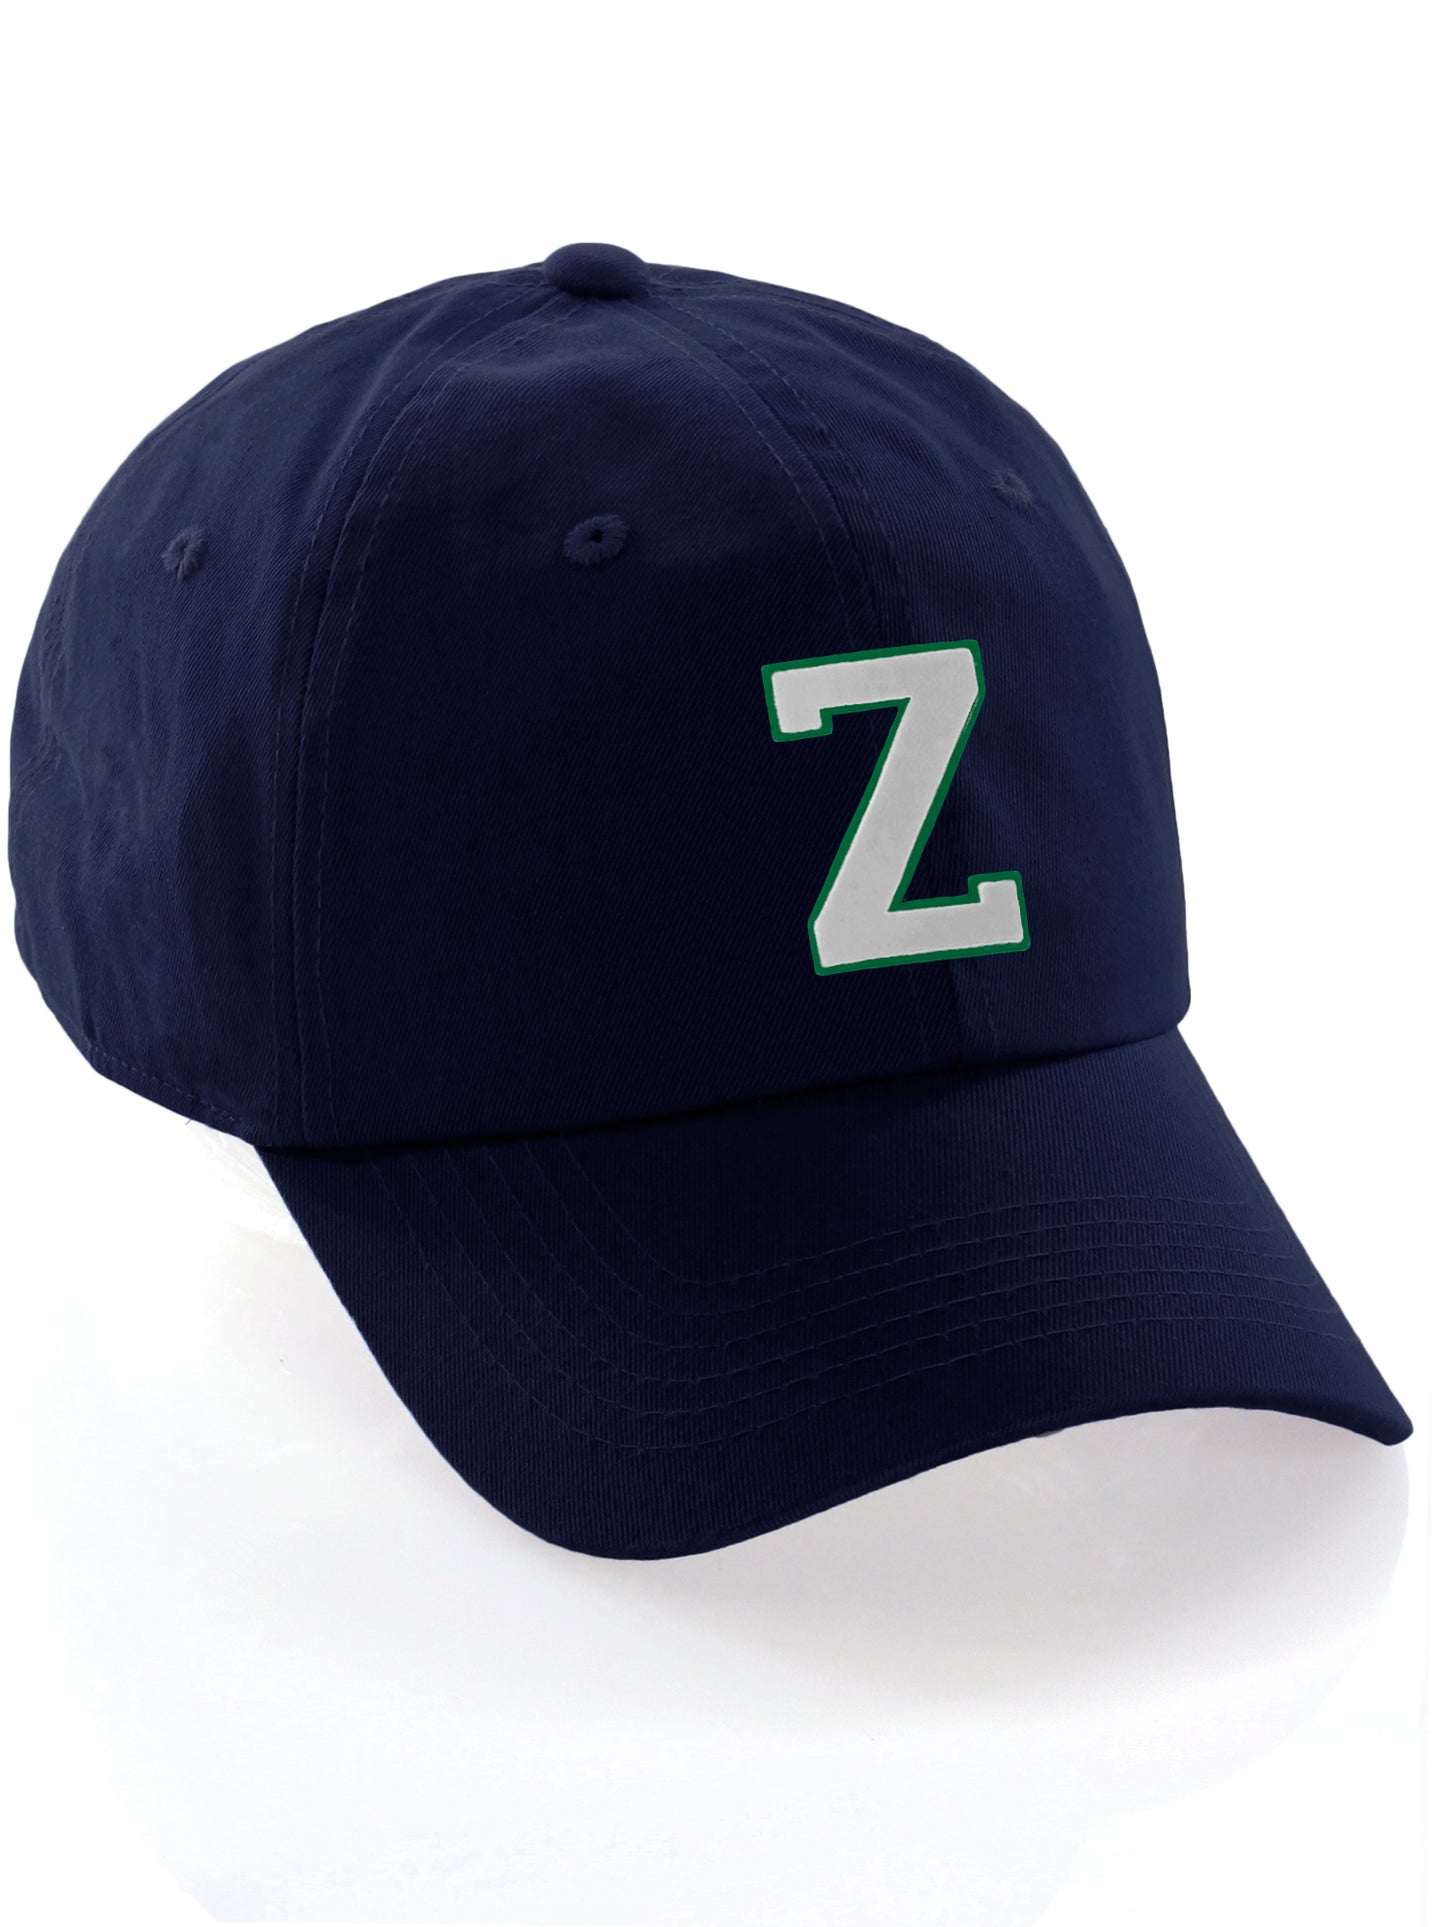 I&W Hatgear Customized Letter Initial Baseball Hat A to Z Team Colors, Navy Csp Green White